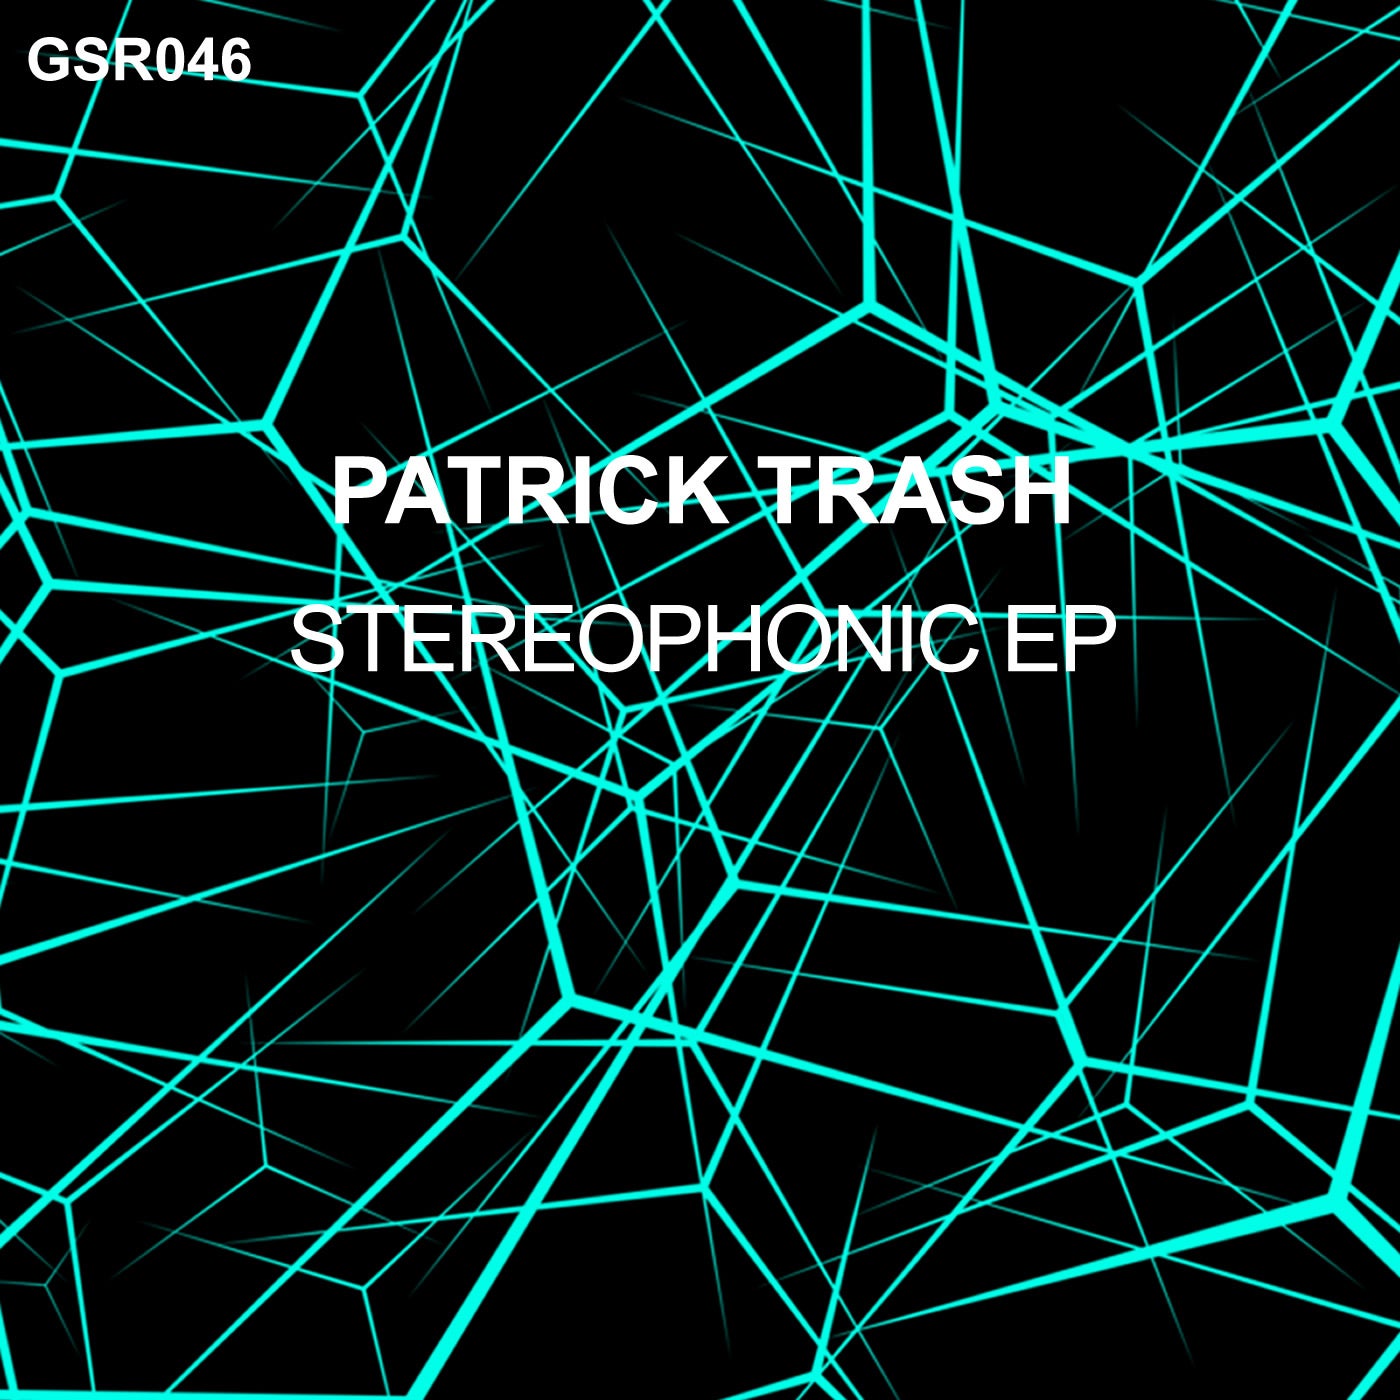 Stereophonic EP